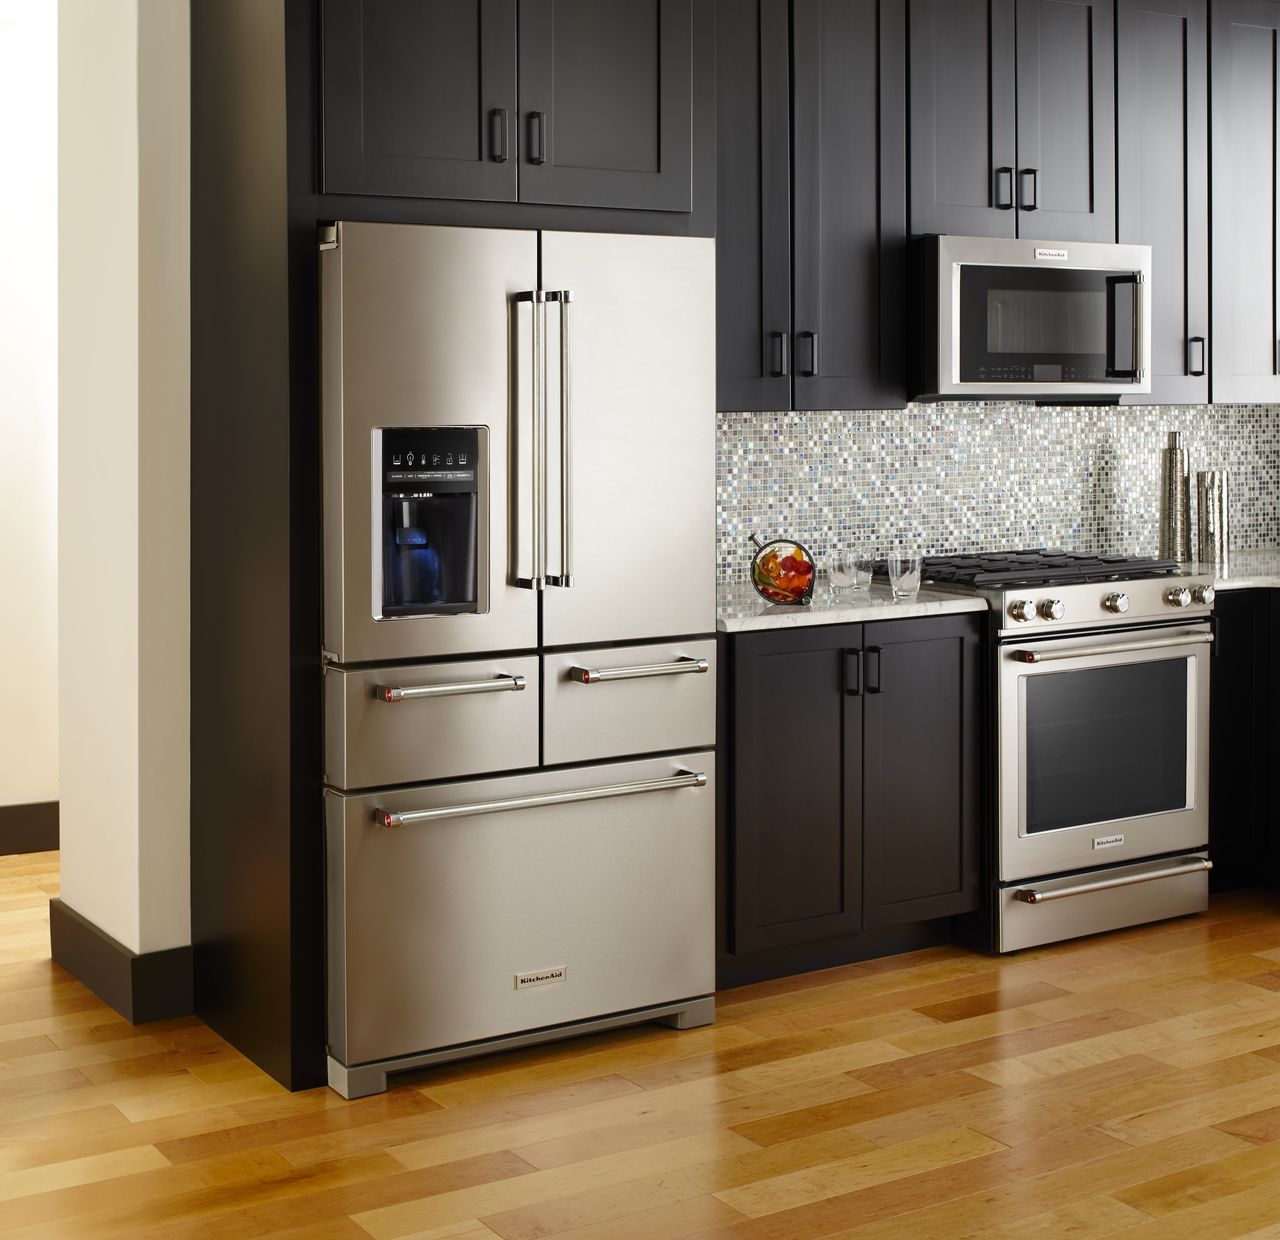 Smart appliances: conditioners and refrigerators will have the